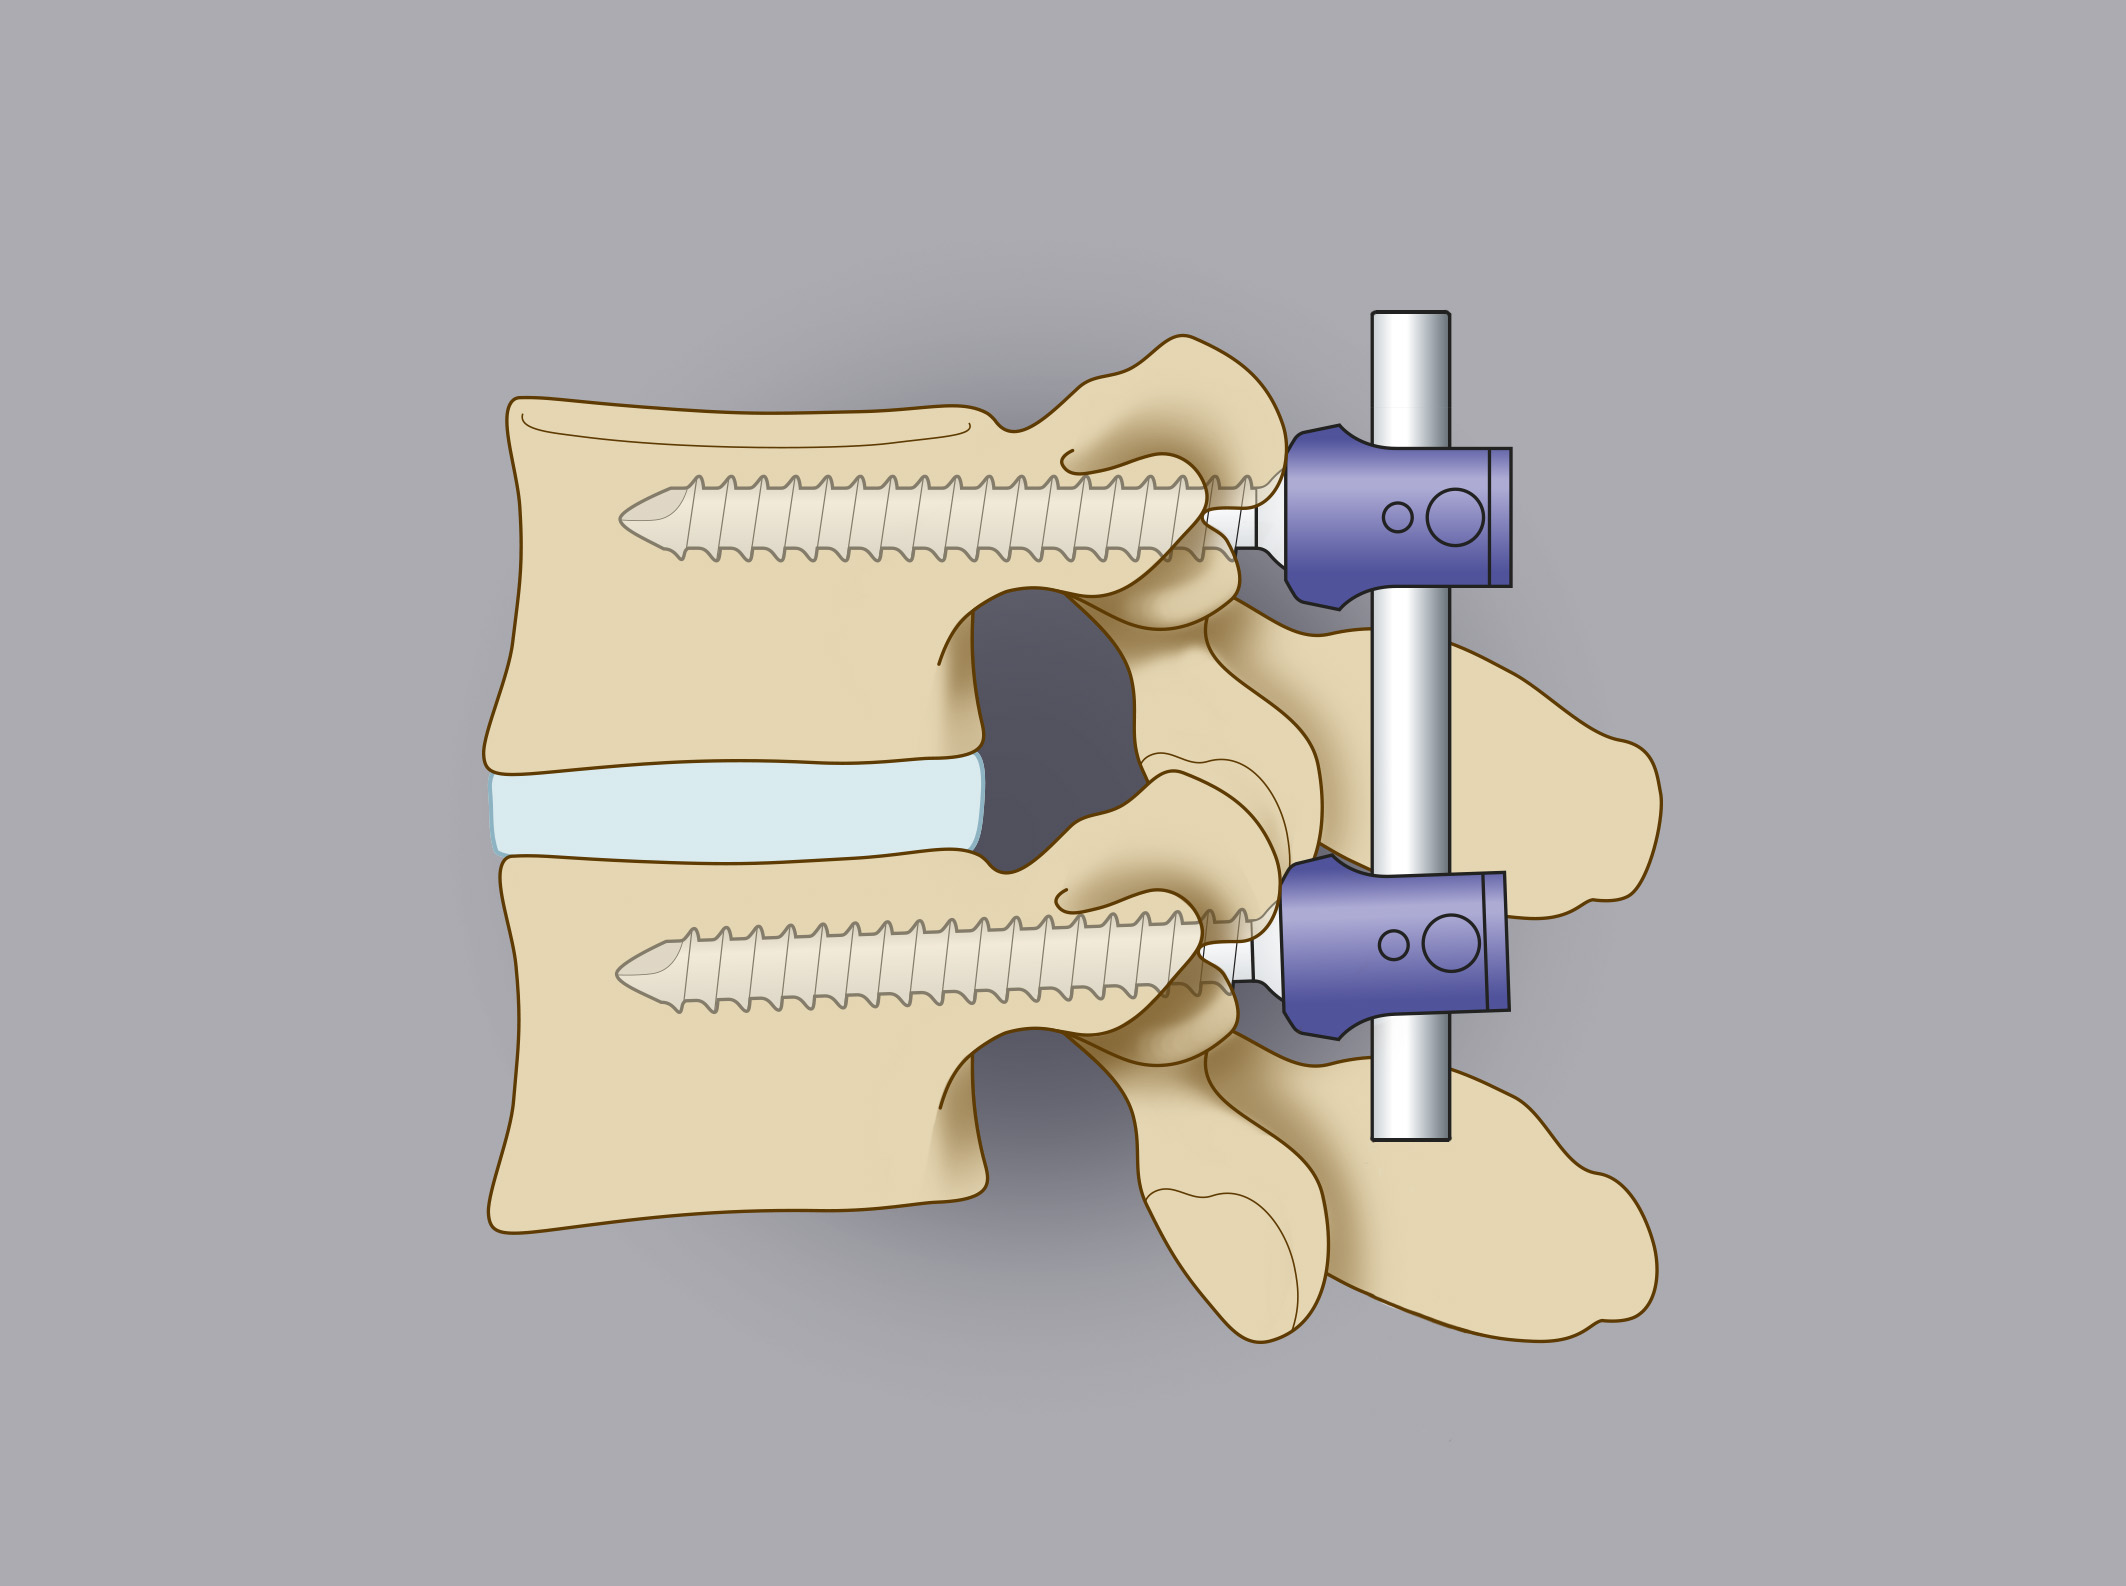 Surgical treatment of the lumbar disc herniation. In some cases, the discectomy is associated to  vertebral stabilization. The picture shows the transpedicular screws and bars.